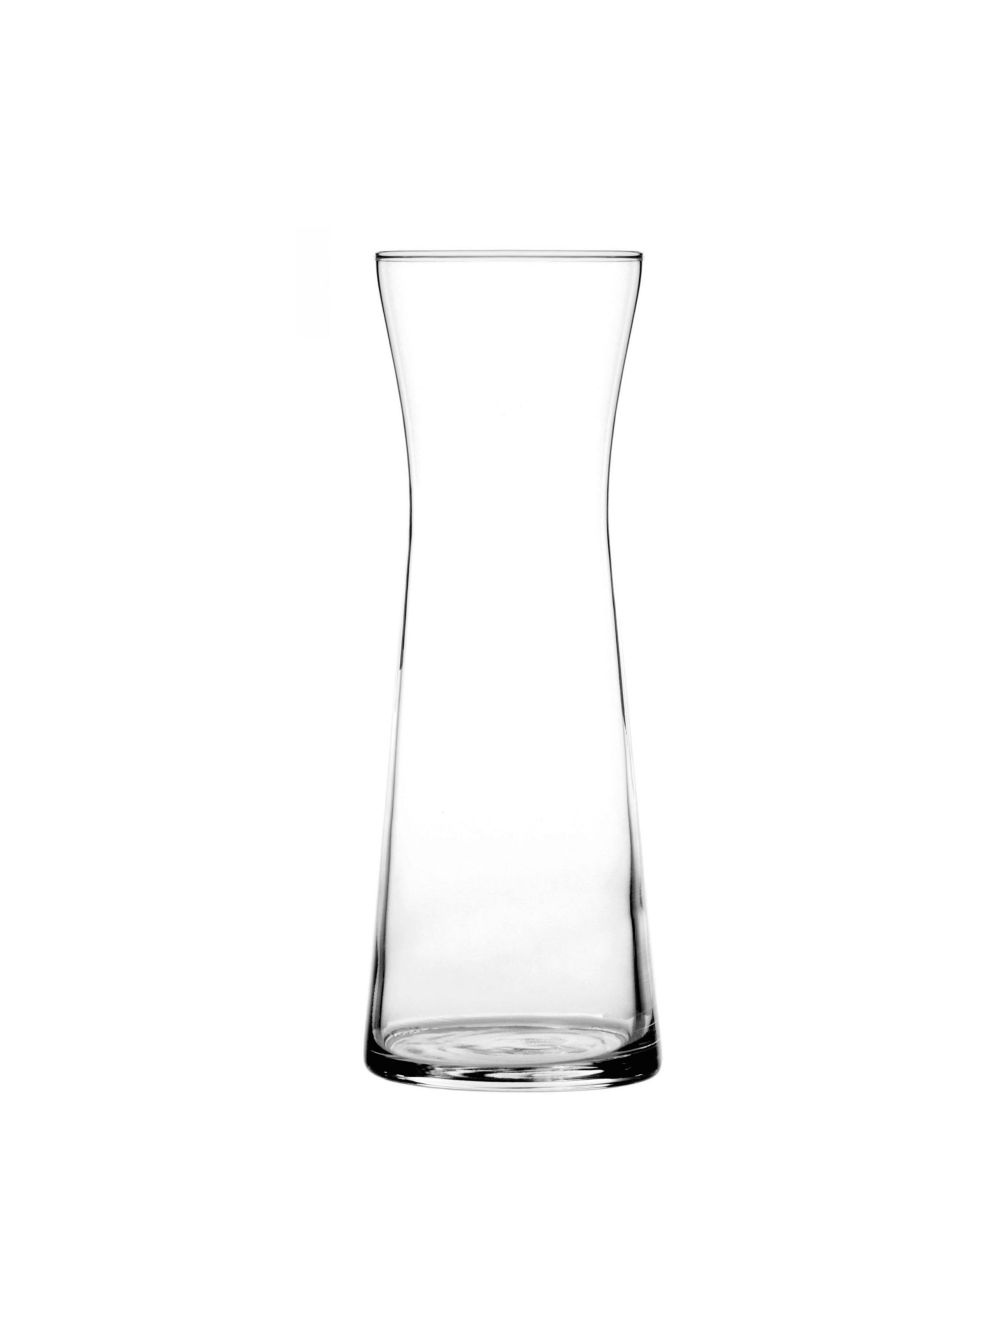 Ocean Tempo Carafe Glass 970ml Pack Of 6